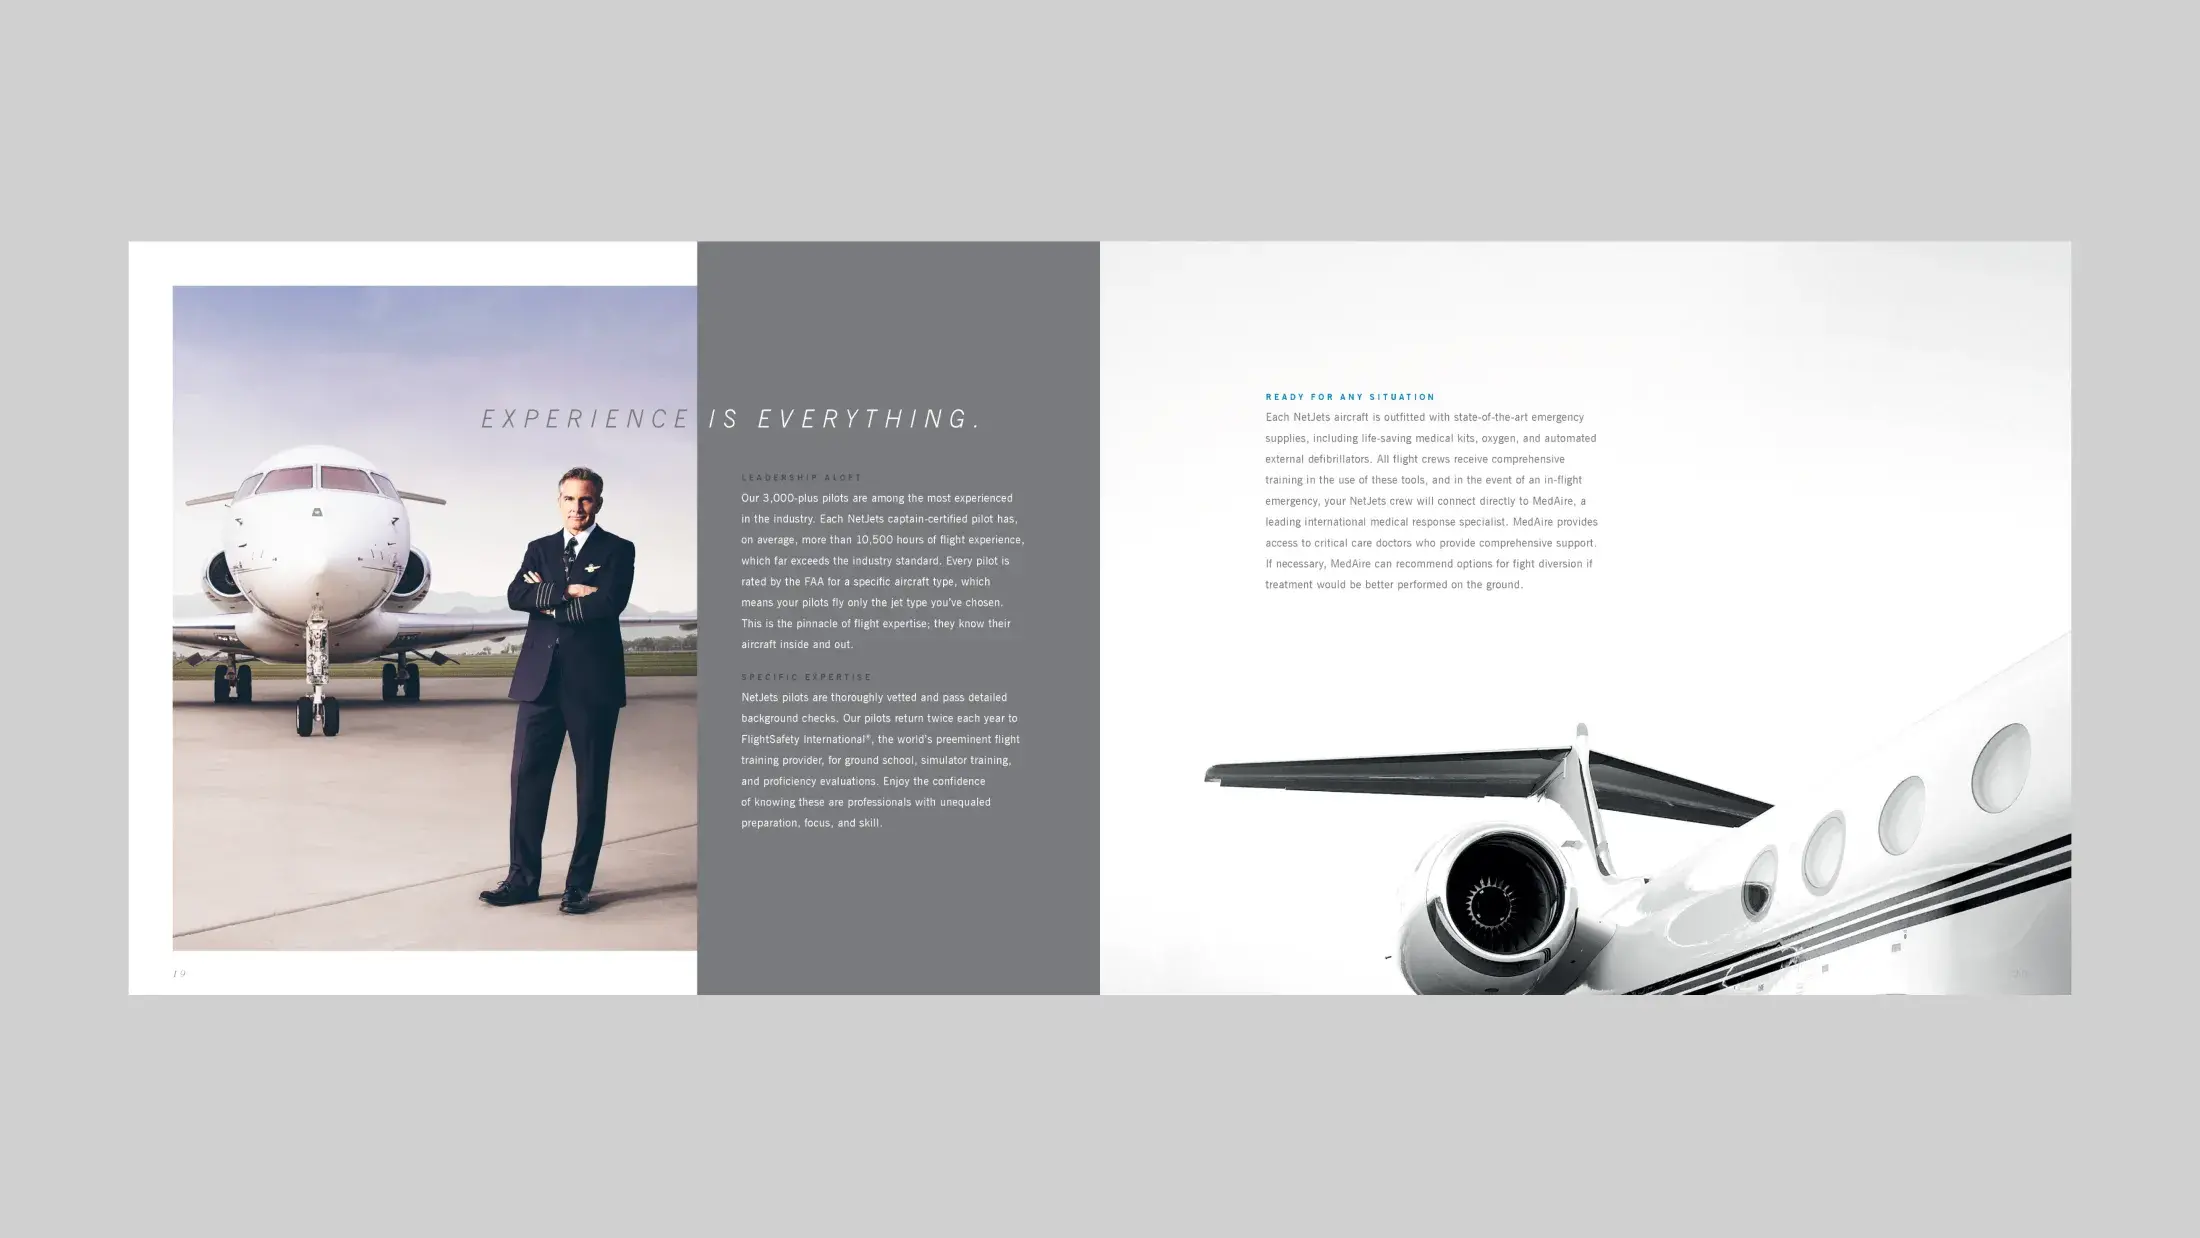 page titled "Experience is Everything" featuring a pilot standing confidently in front of a jet